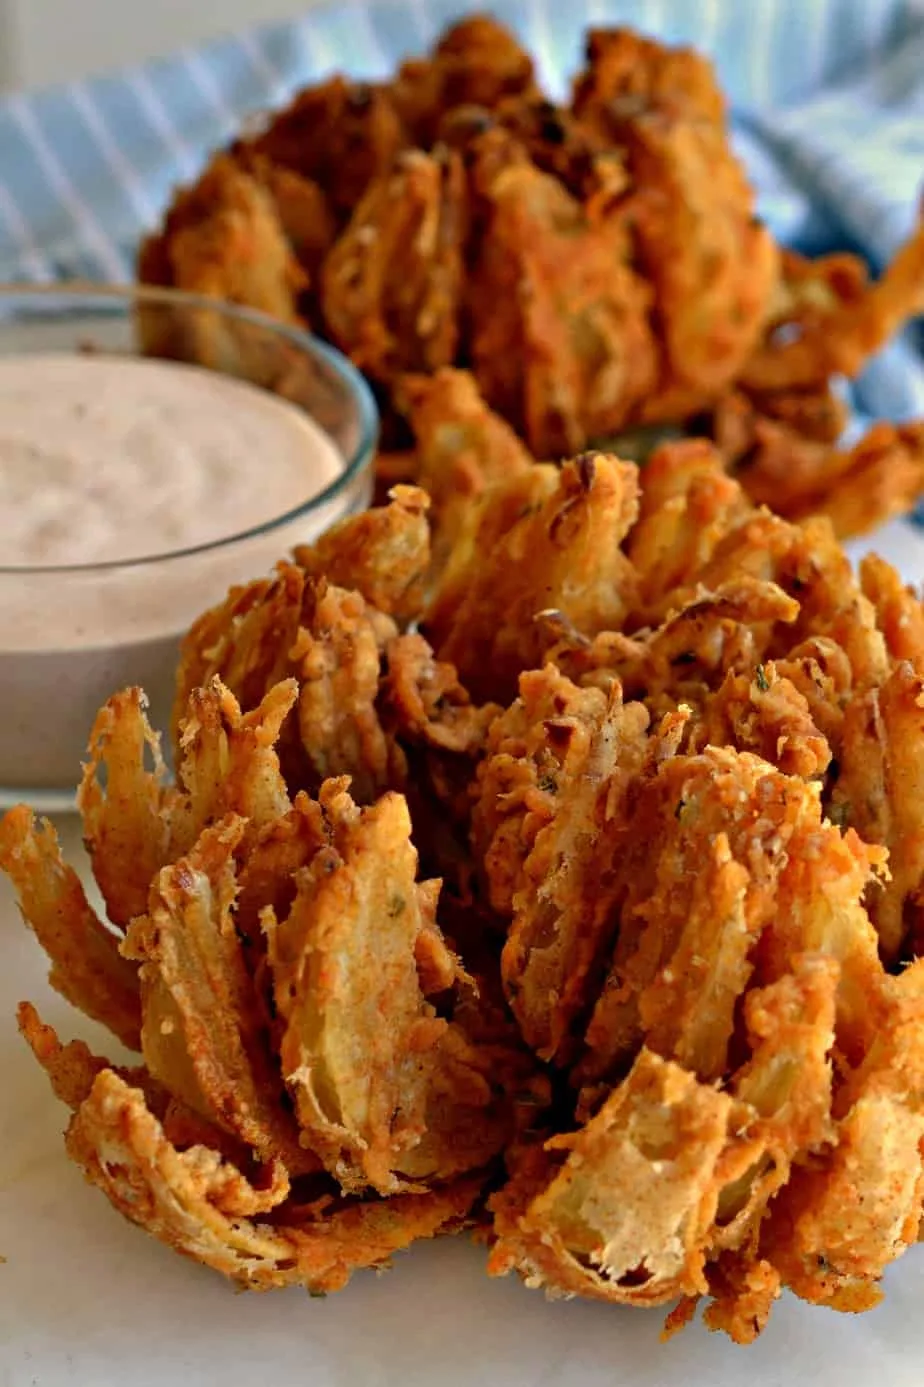 This drool-worthy appetizer that's a fan-favorite at many restaurants can be made right at home, thanks to this easy recipe. I'll show you how to cut the onion into a "bloom," how to easily coat it in batter and how to deep fry it. It's easier than you think and once you do it, your family will be requesting it regularly! via @Mooreorlesscook